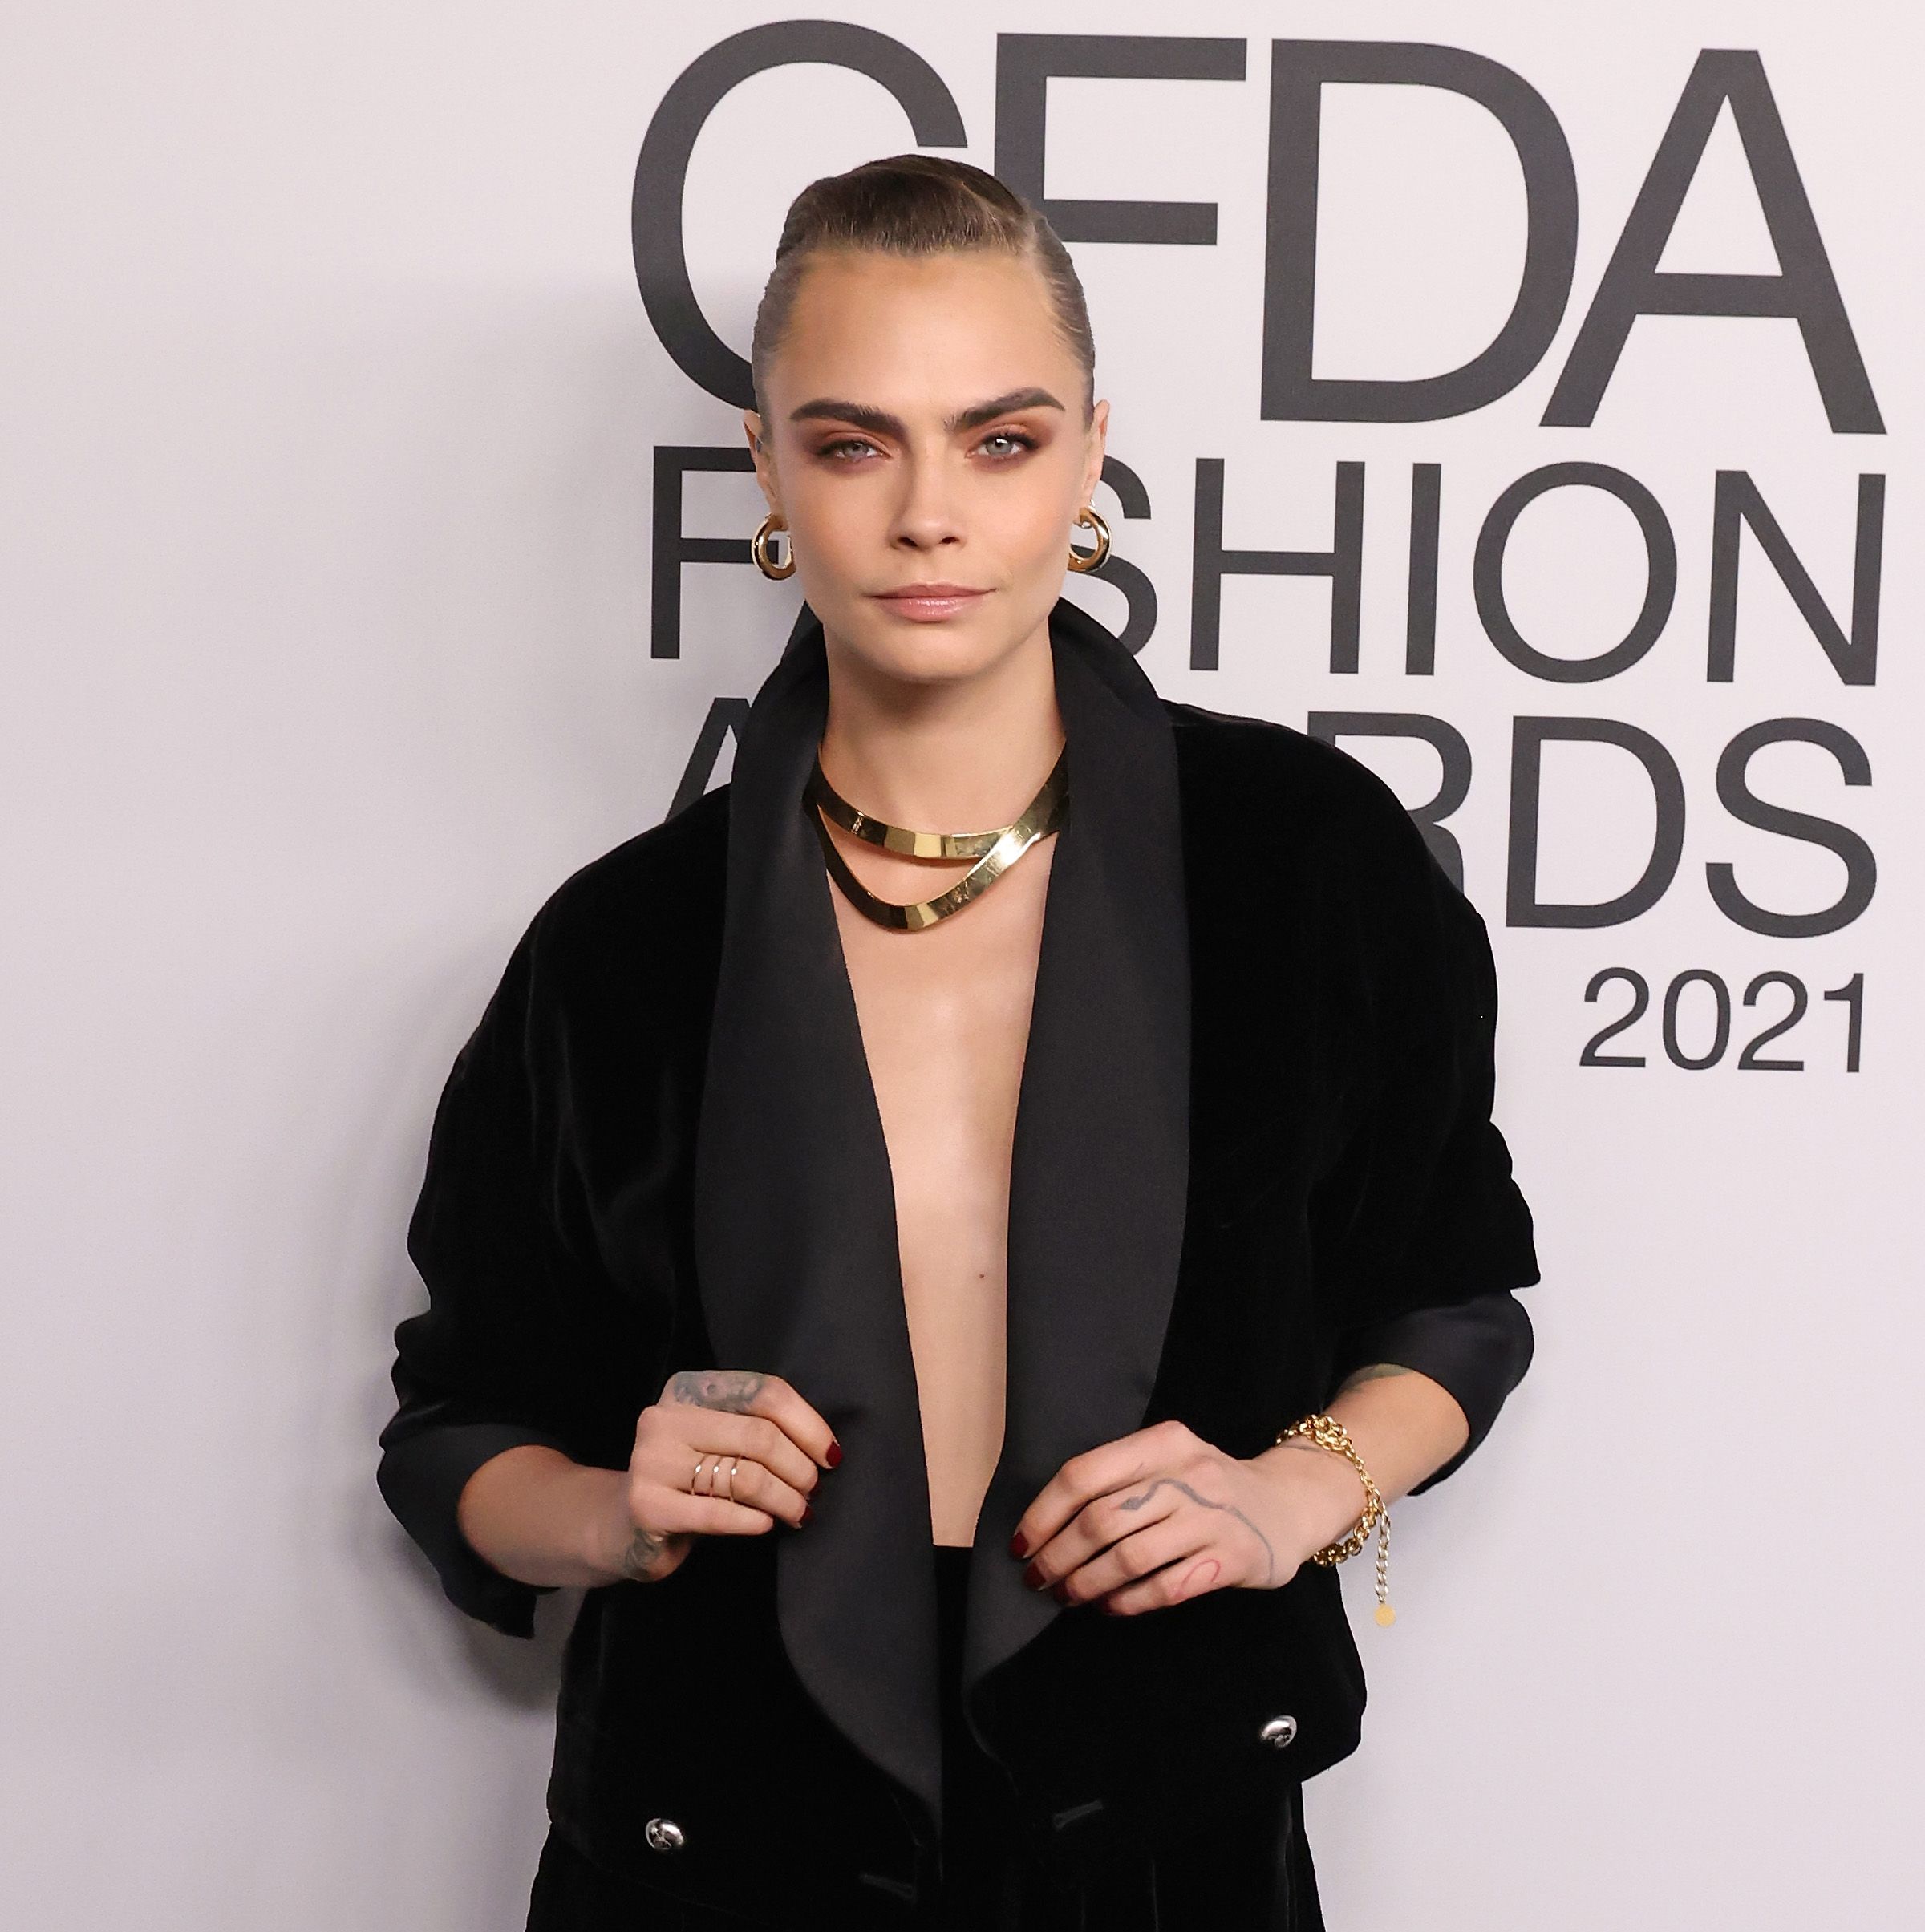 Cara Delevingne Wishes She Had LGBTQ+ Role Models During Her 